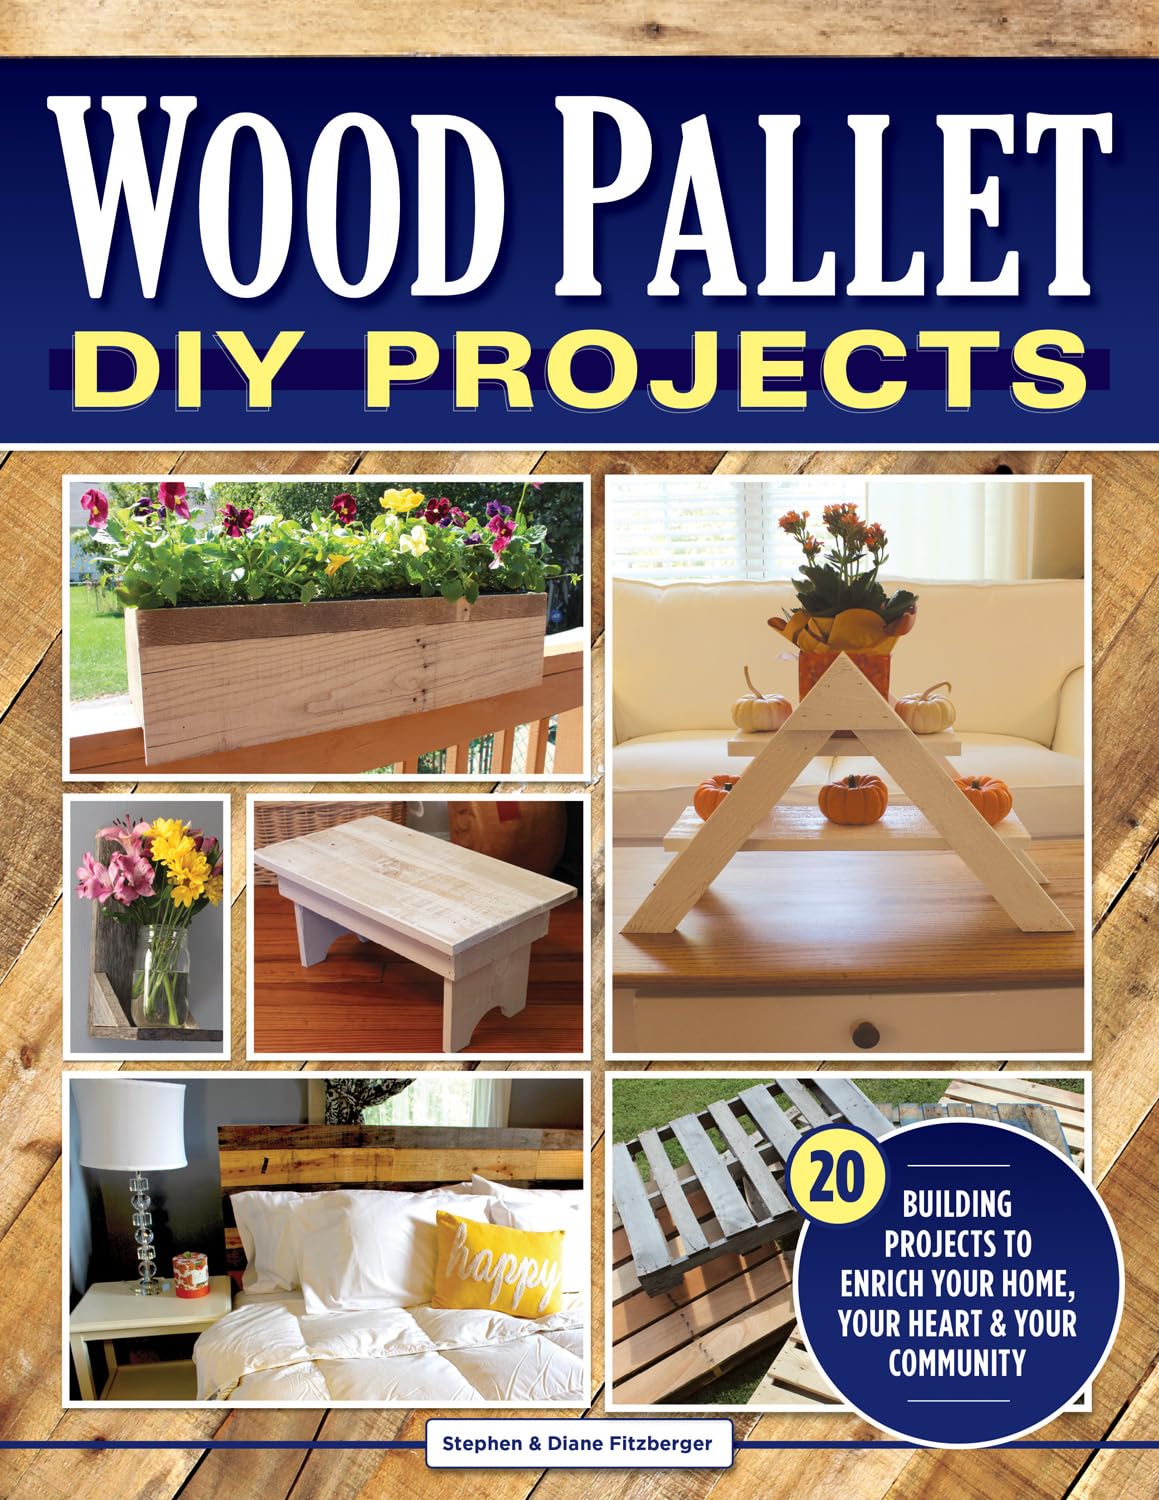 Wood Pallet DIY Projects: 20 Building Projects to Enrich Your Home, Your Heart & Your Community (Fox Chapel Publishing) Make One-of-a-Kind Useful